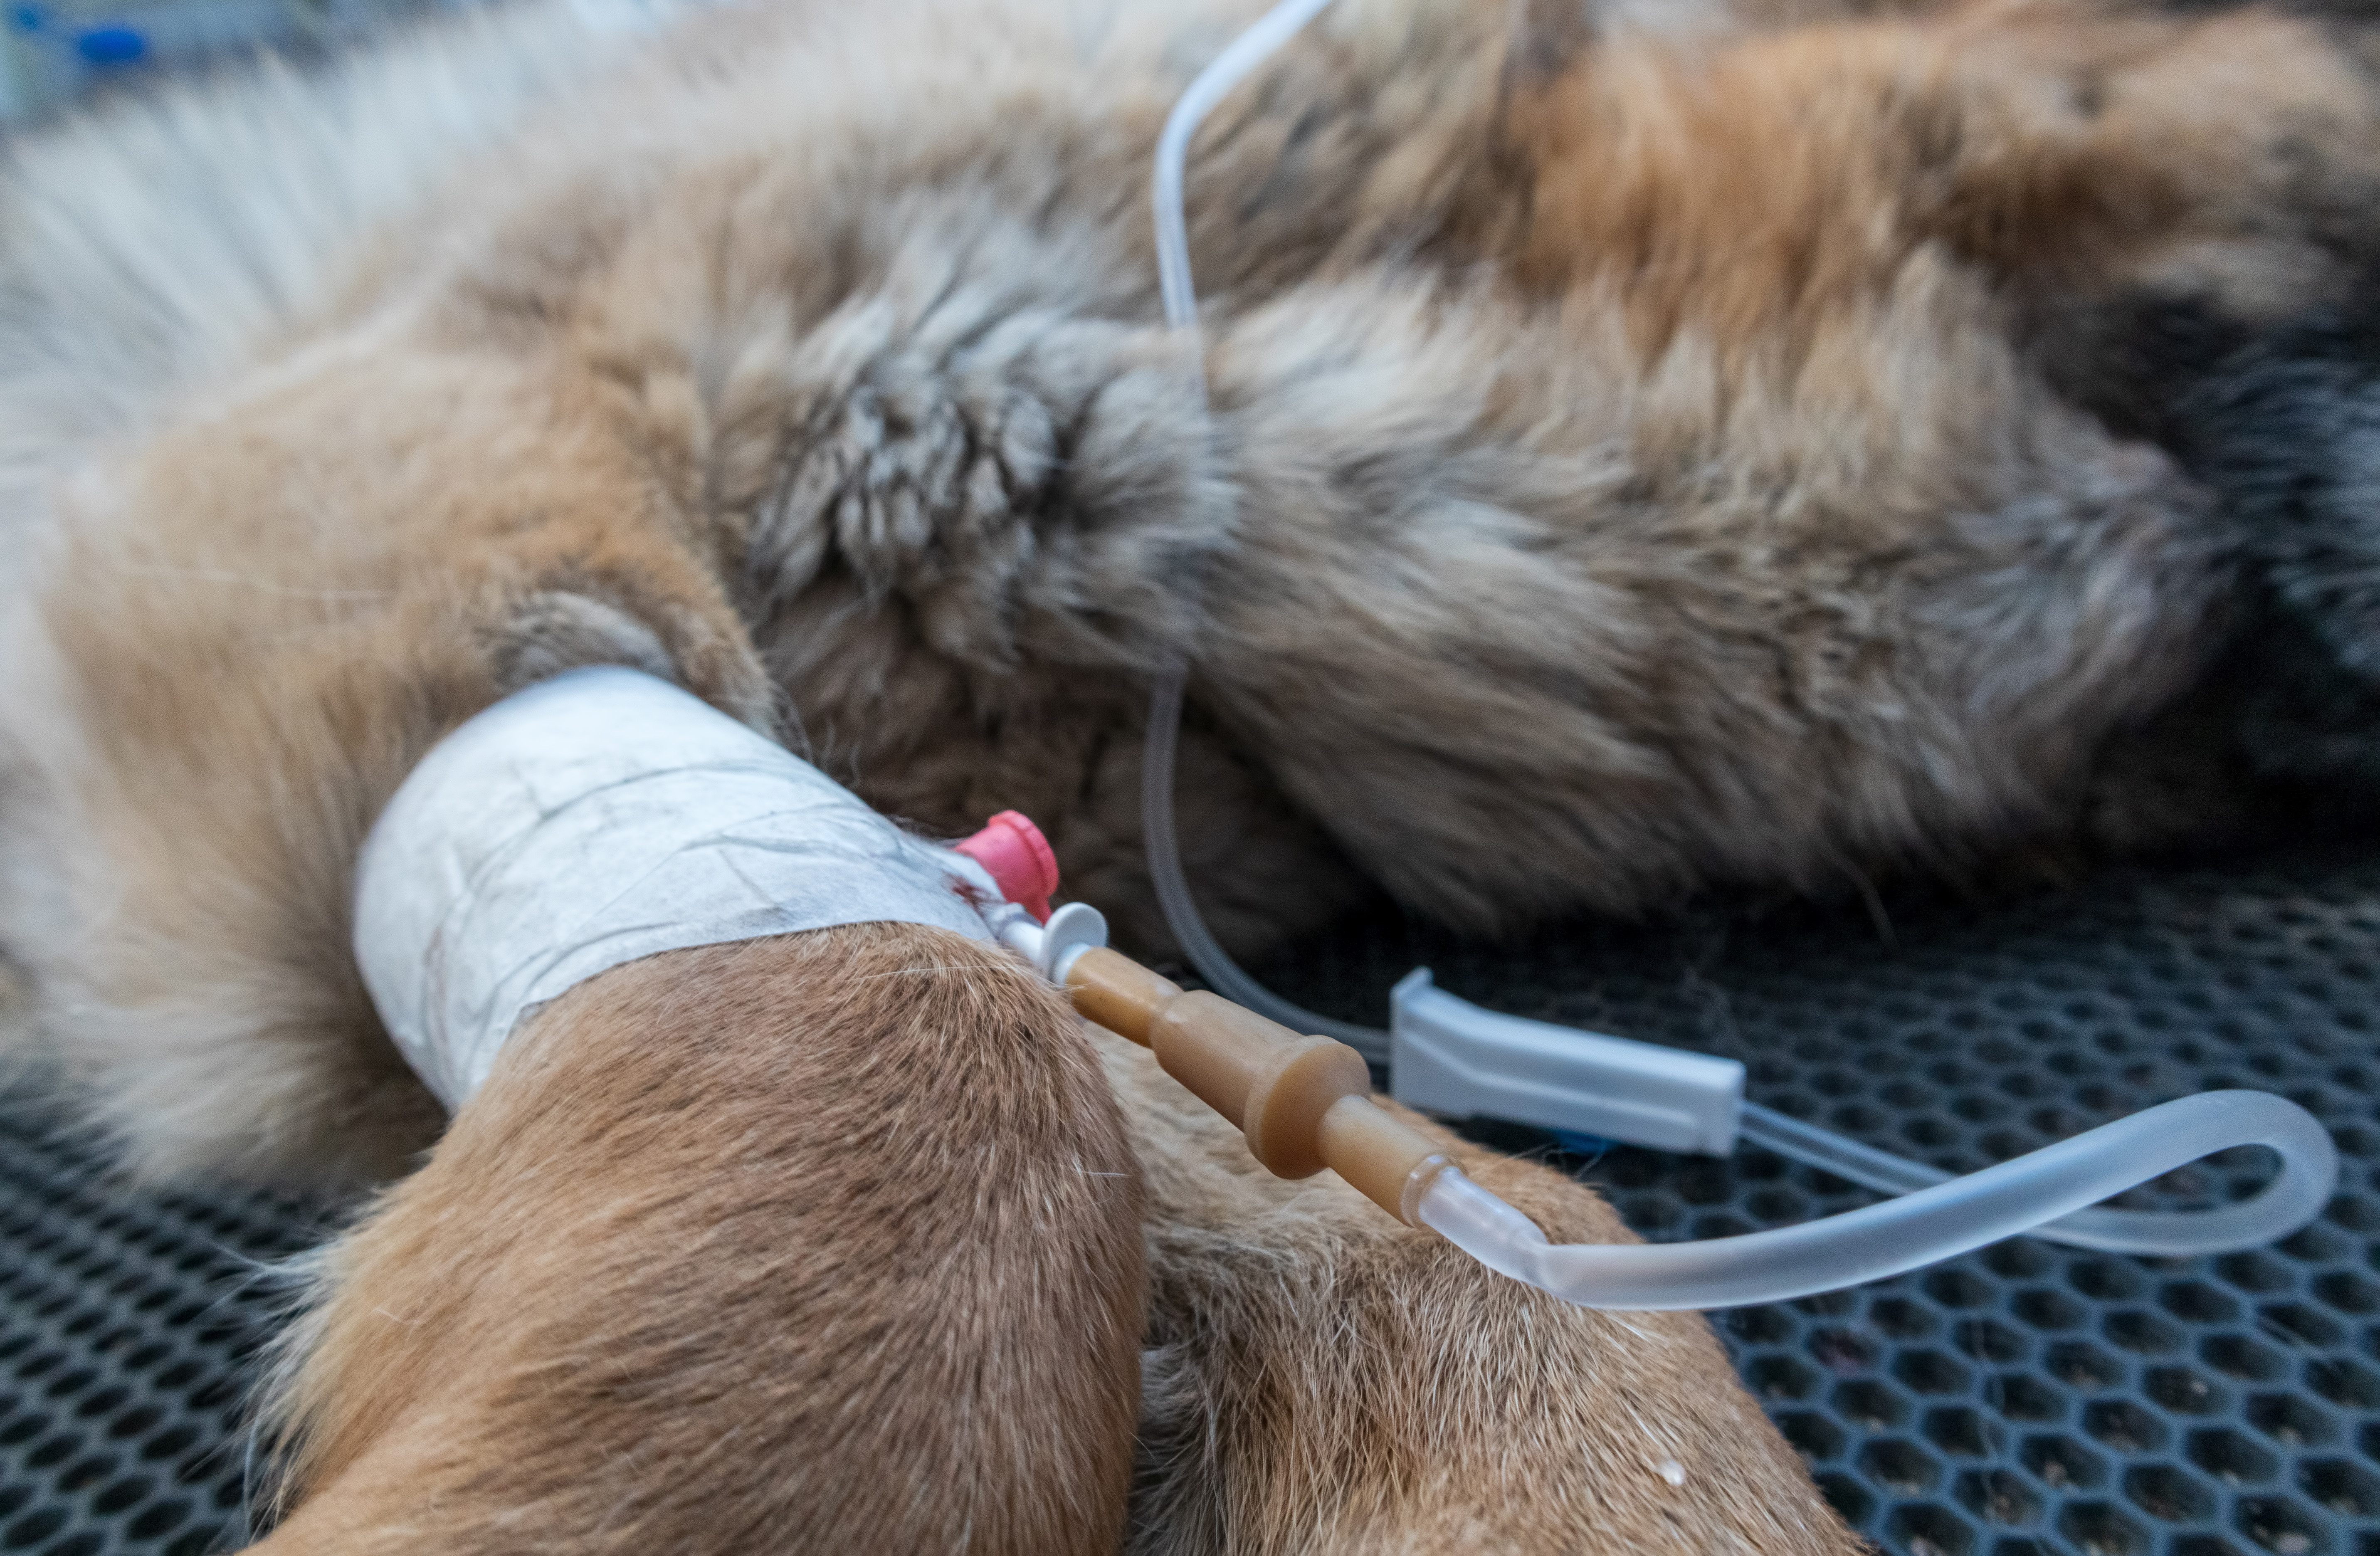 veterinary treatment, a dog under a dropper, a catheter in the paw closeup